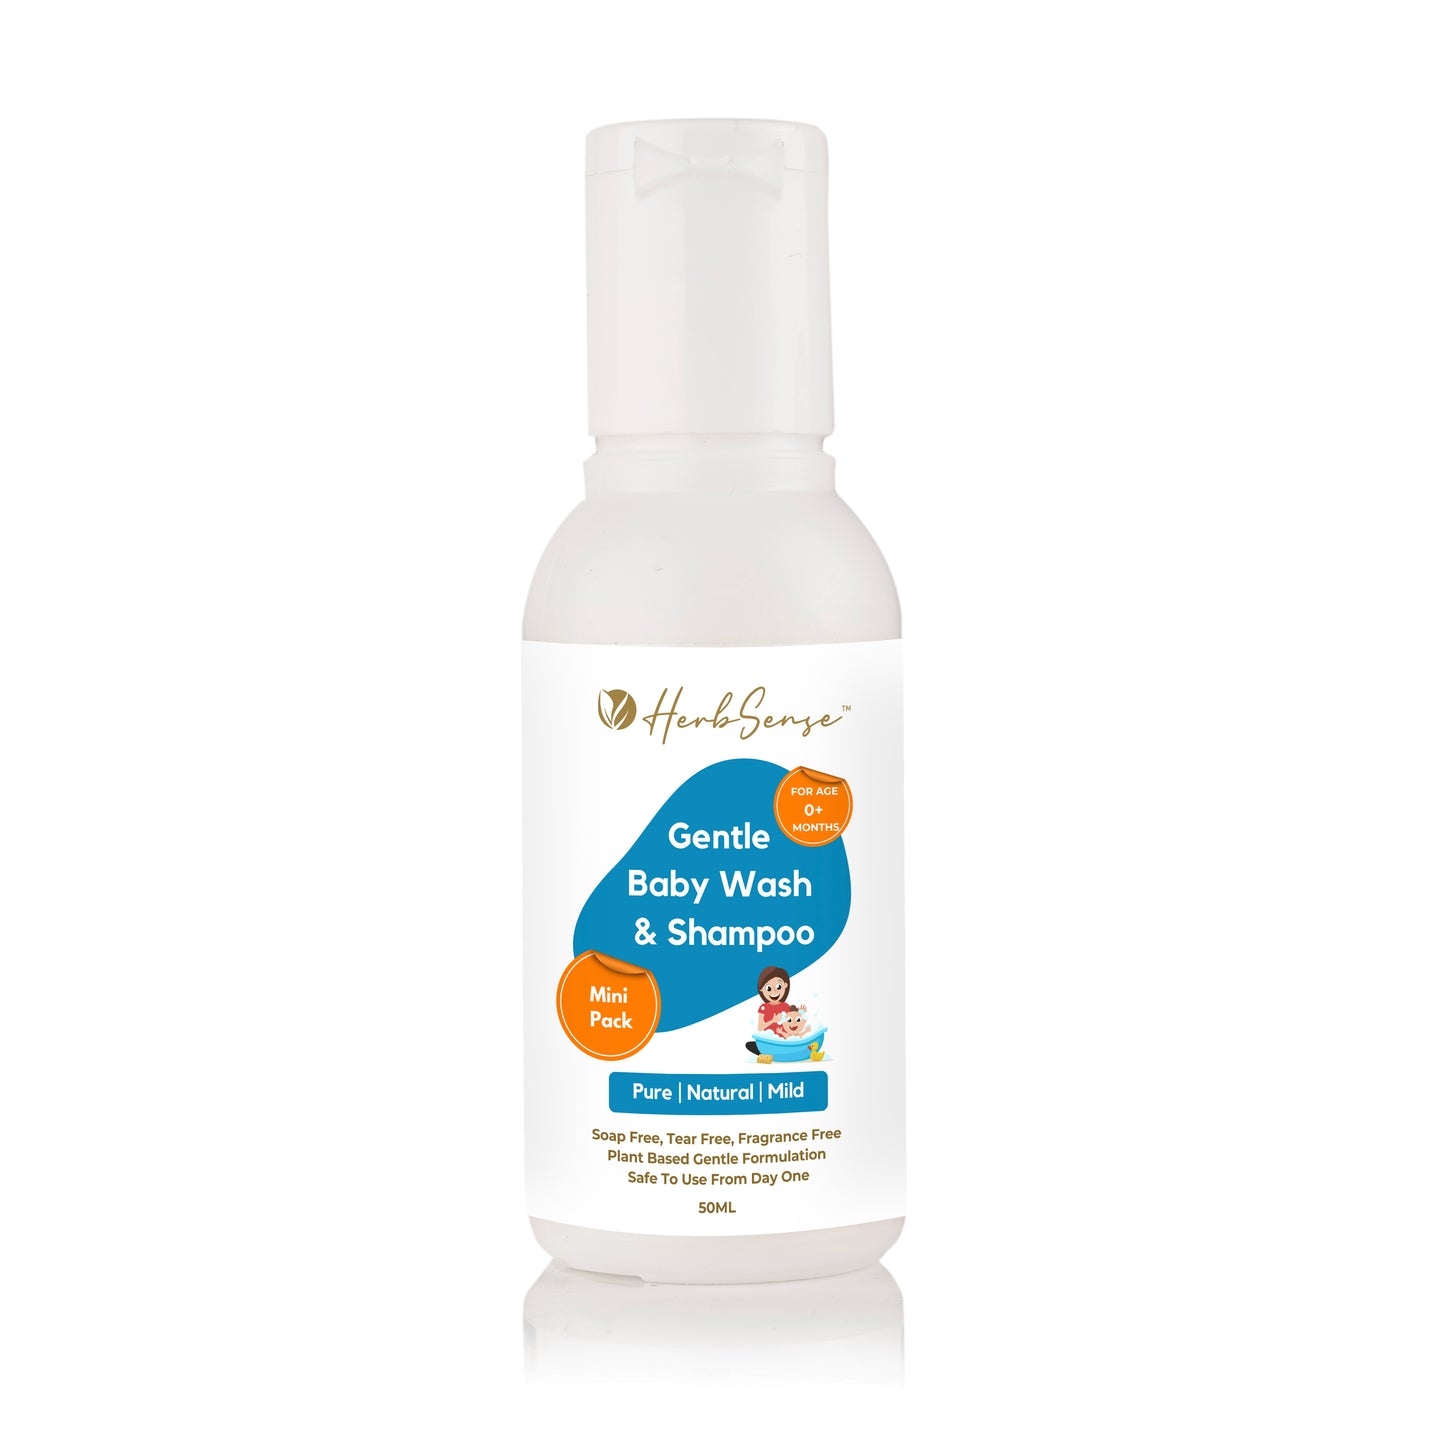 Gentle Baby Wash & Shampoo- 200ml | Plant Based | Gentle & Safe to Use from Day 1 | Soap Free, Tear Free & Fragrance Free